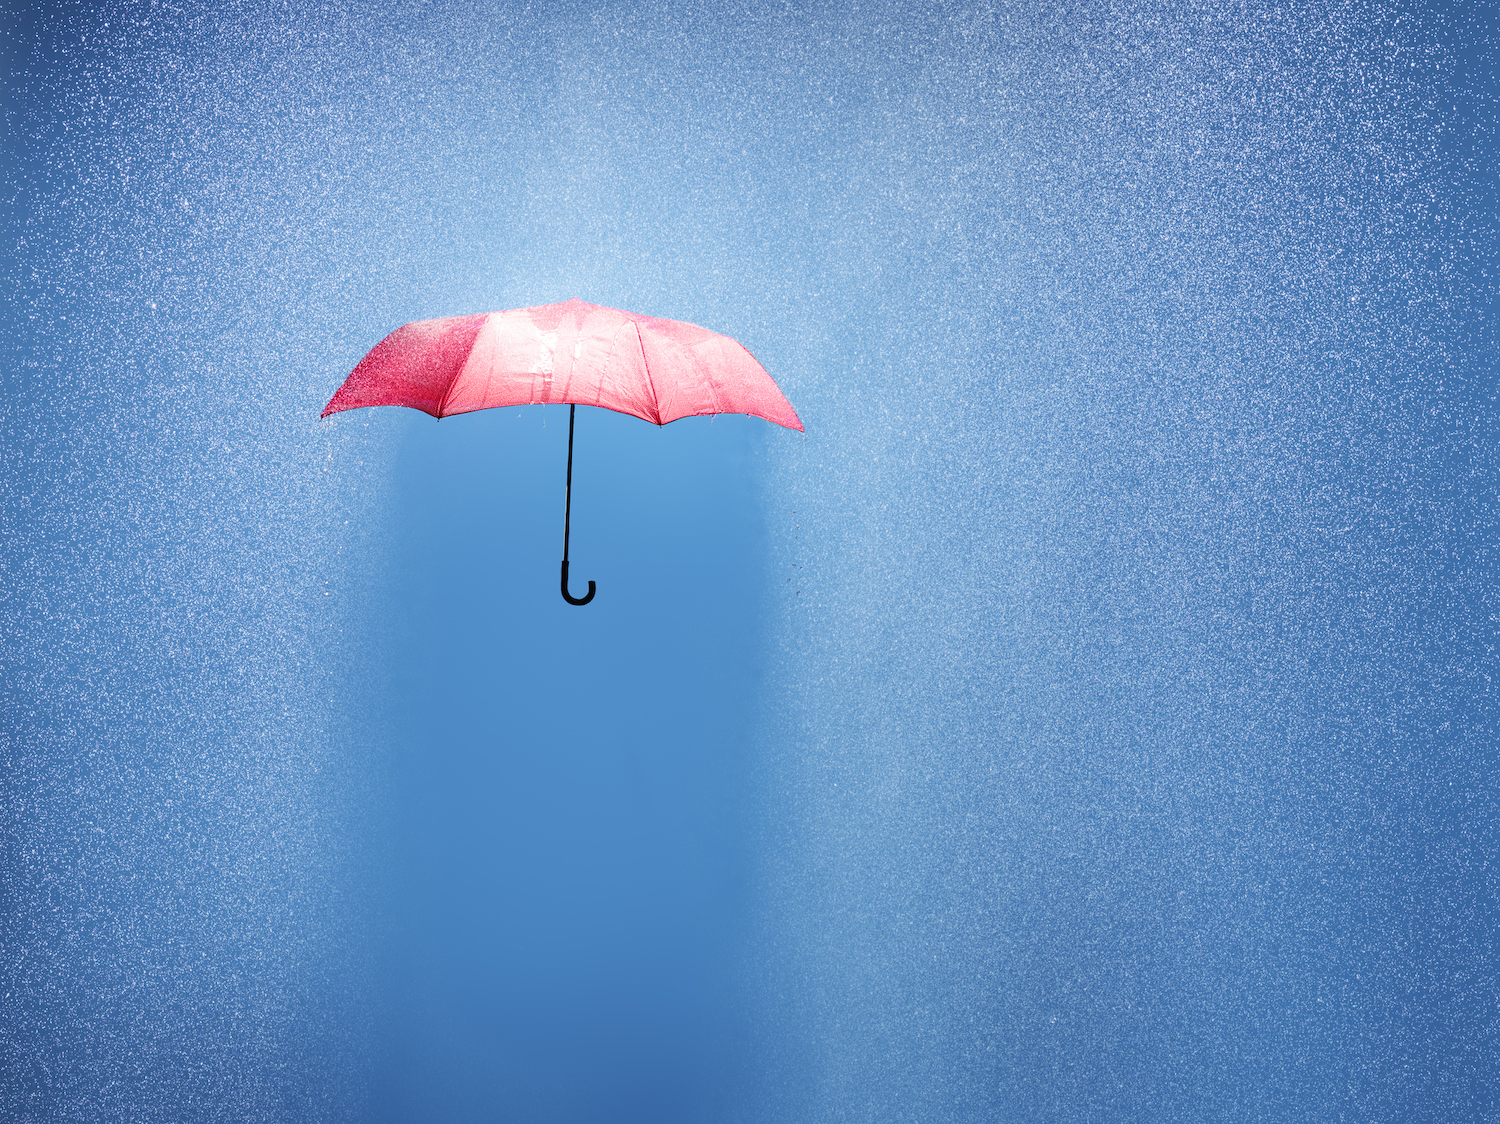 Pink umbrella in a rain shower, photographed conceptually